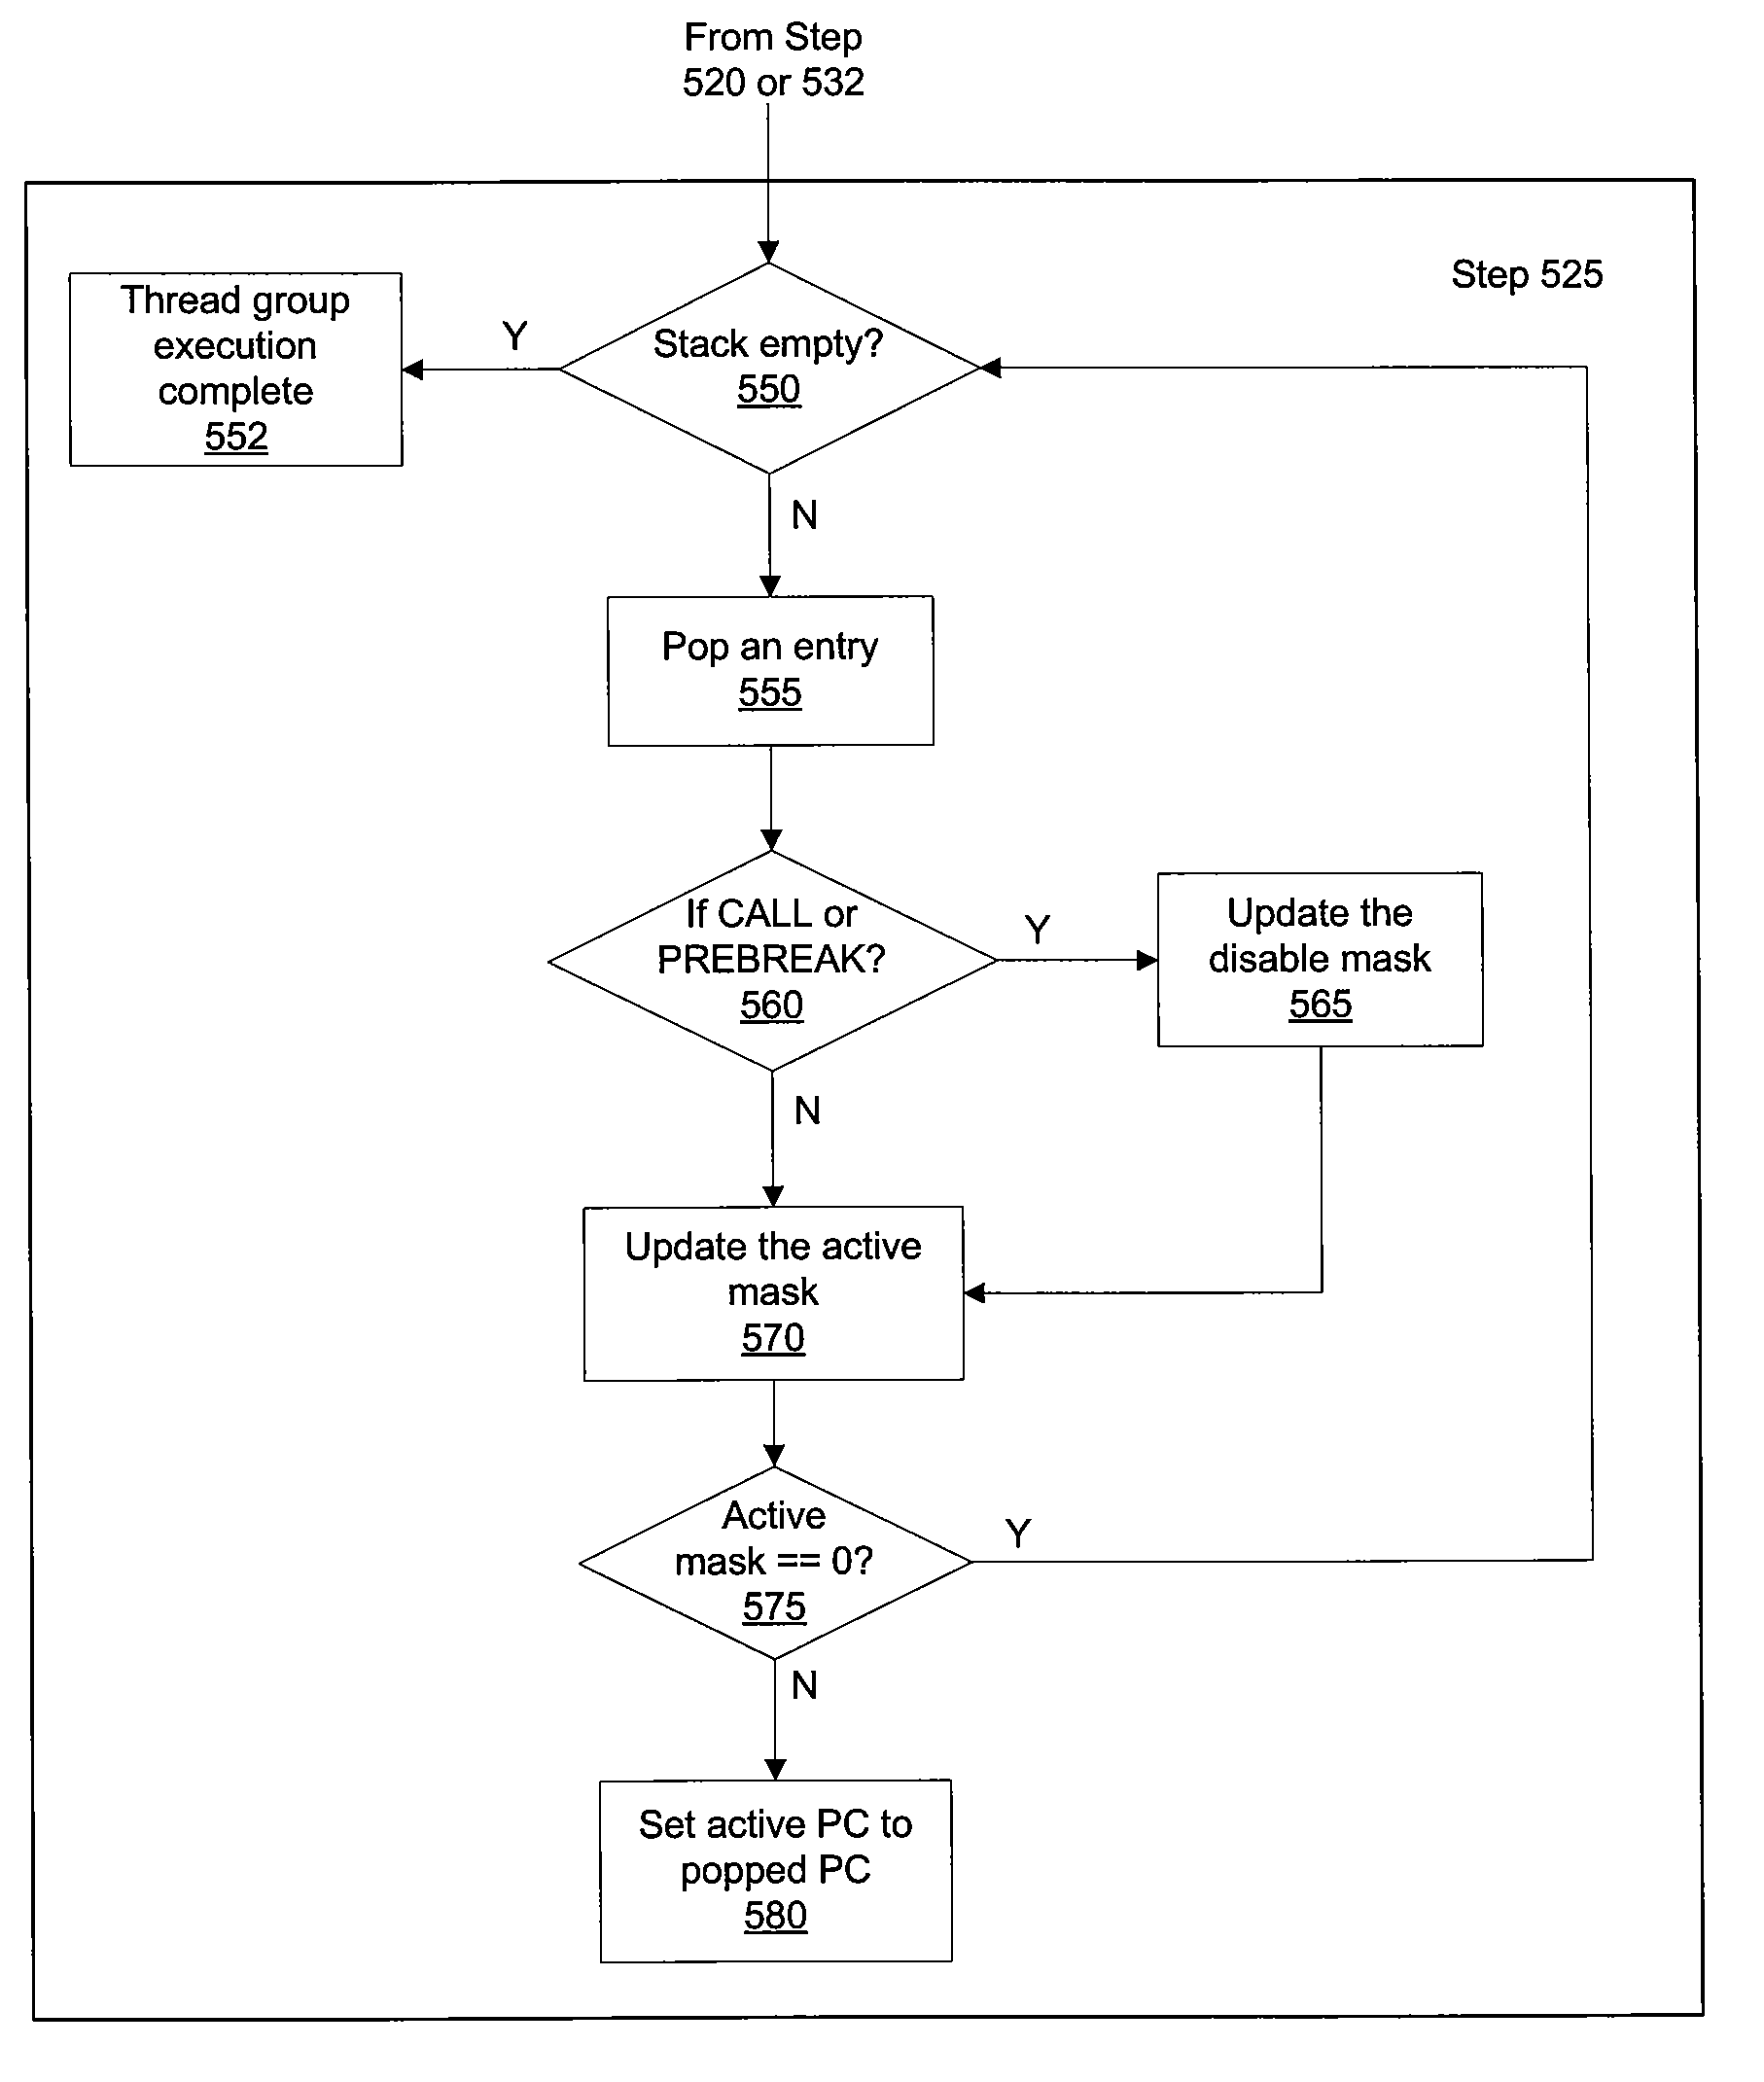 Structured programming control flow in a SIMD architecture